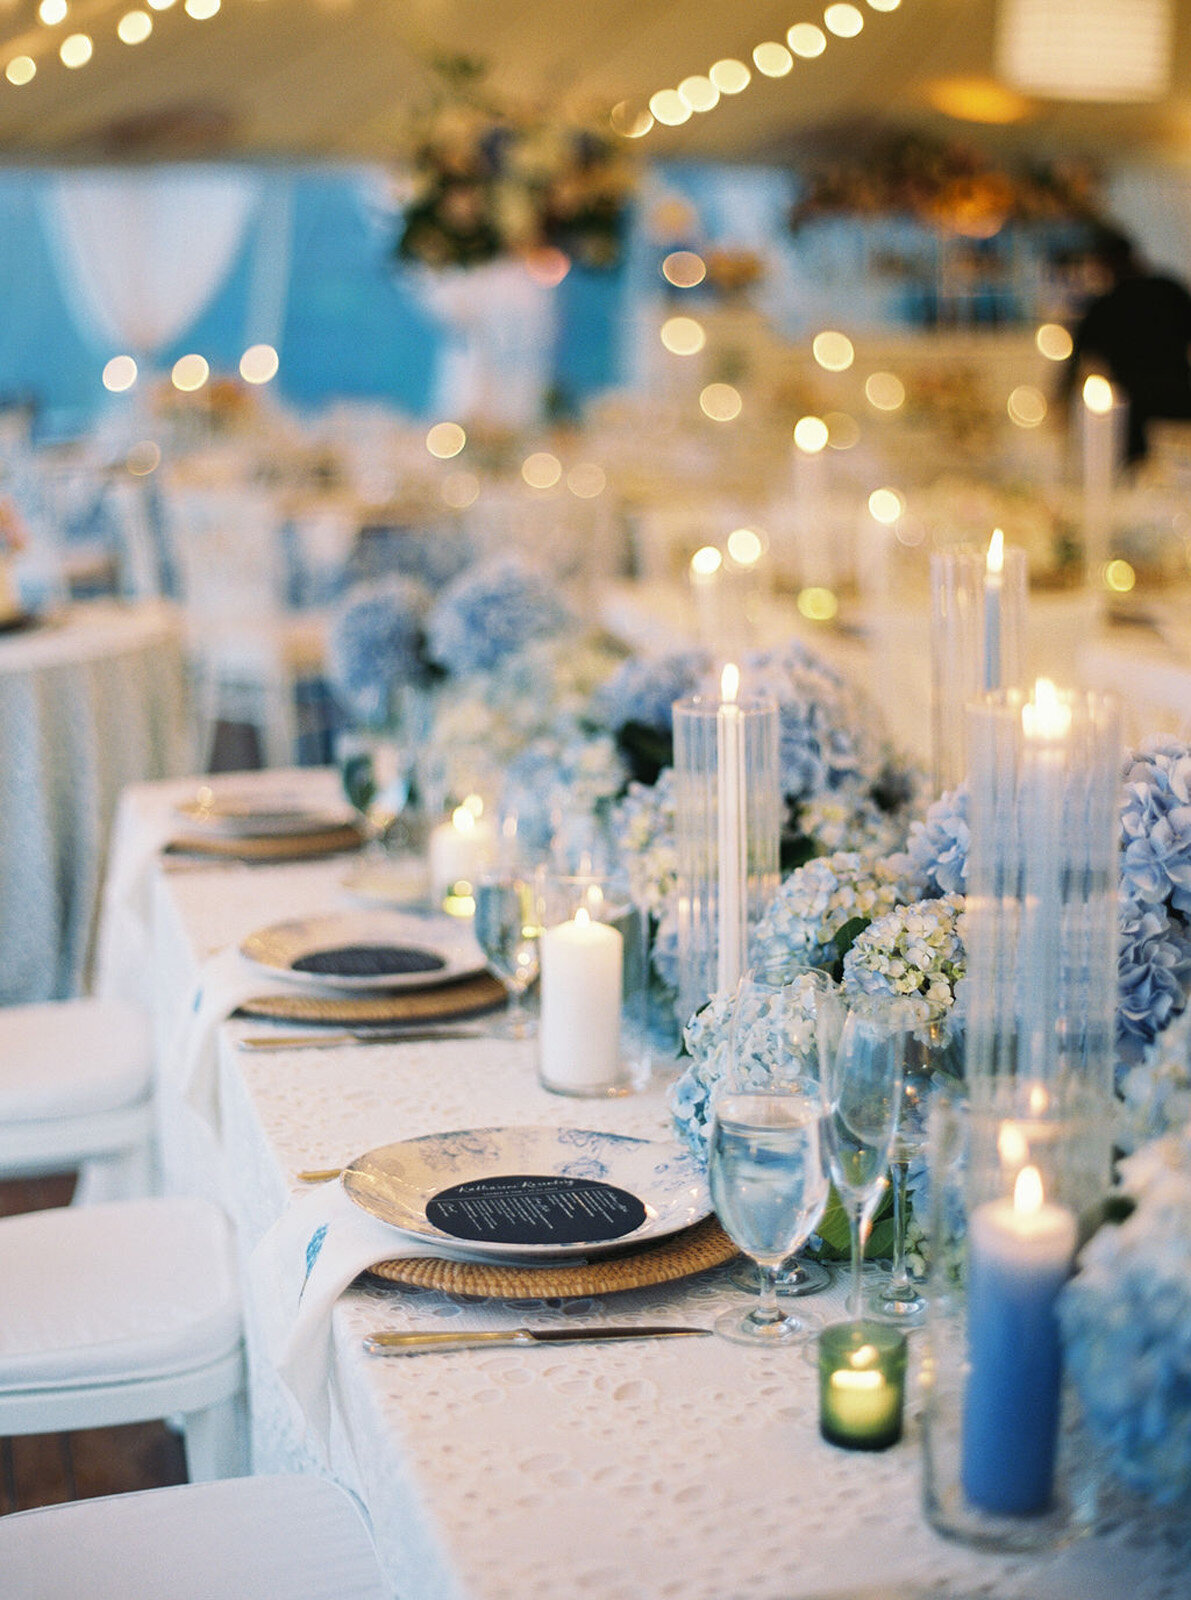 Kate_Murtaugh_Events_Cape_Cod_tented_wedding_headtable